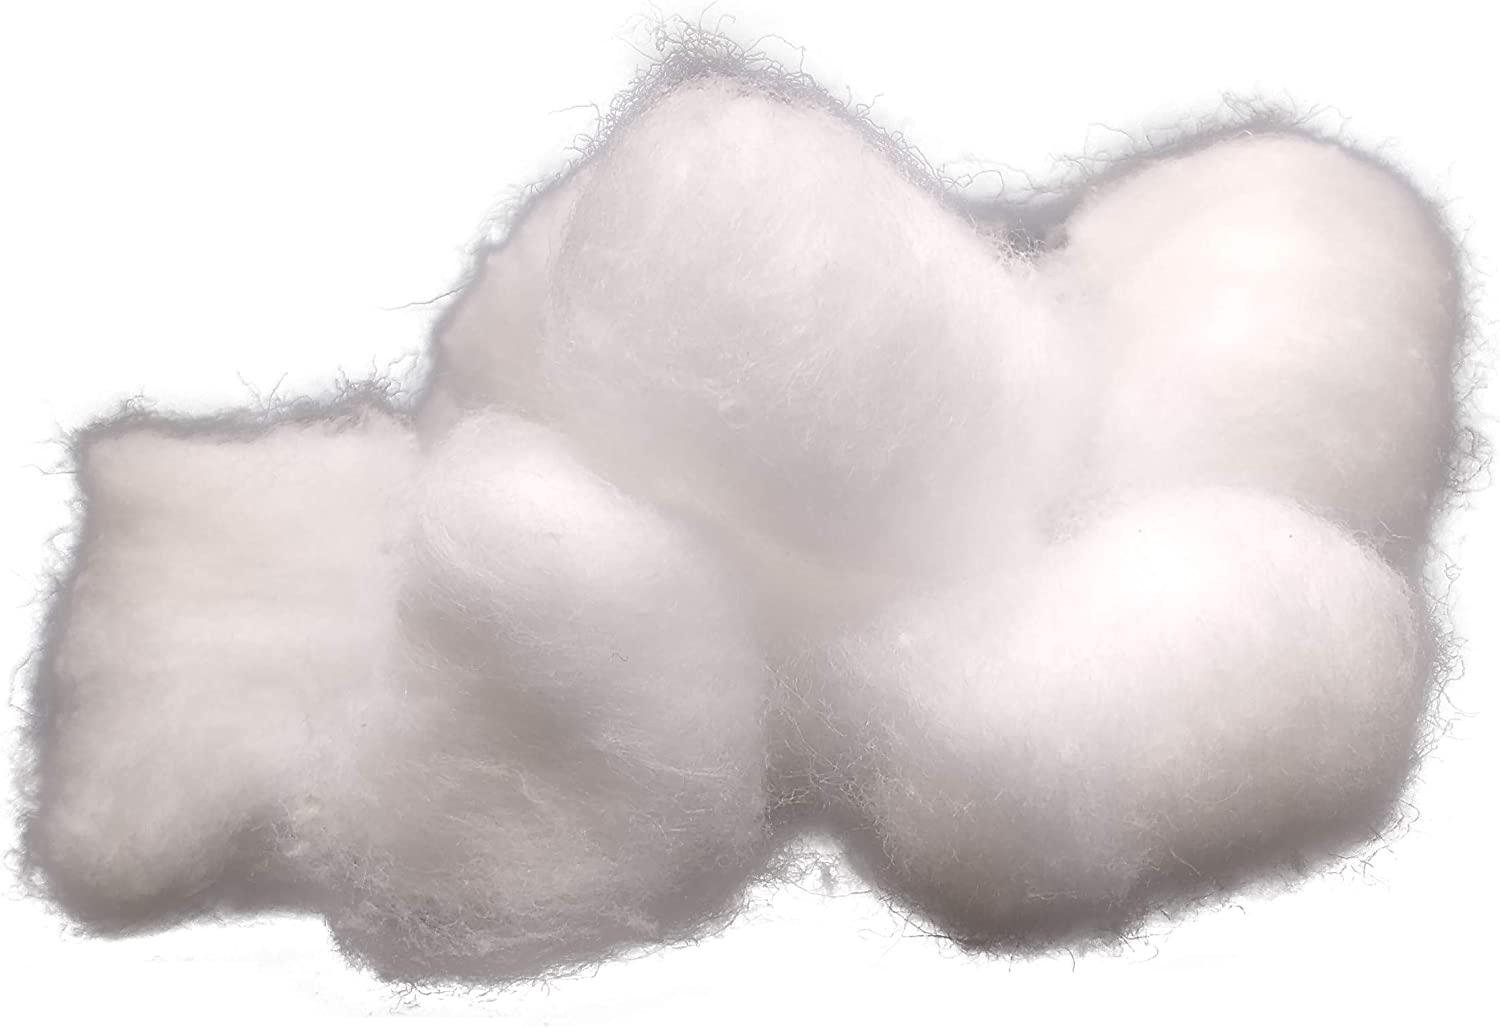  Cotton Balls Colored - Soft and Absorbent, Ideal for